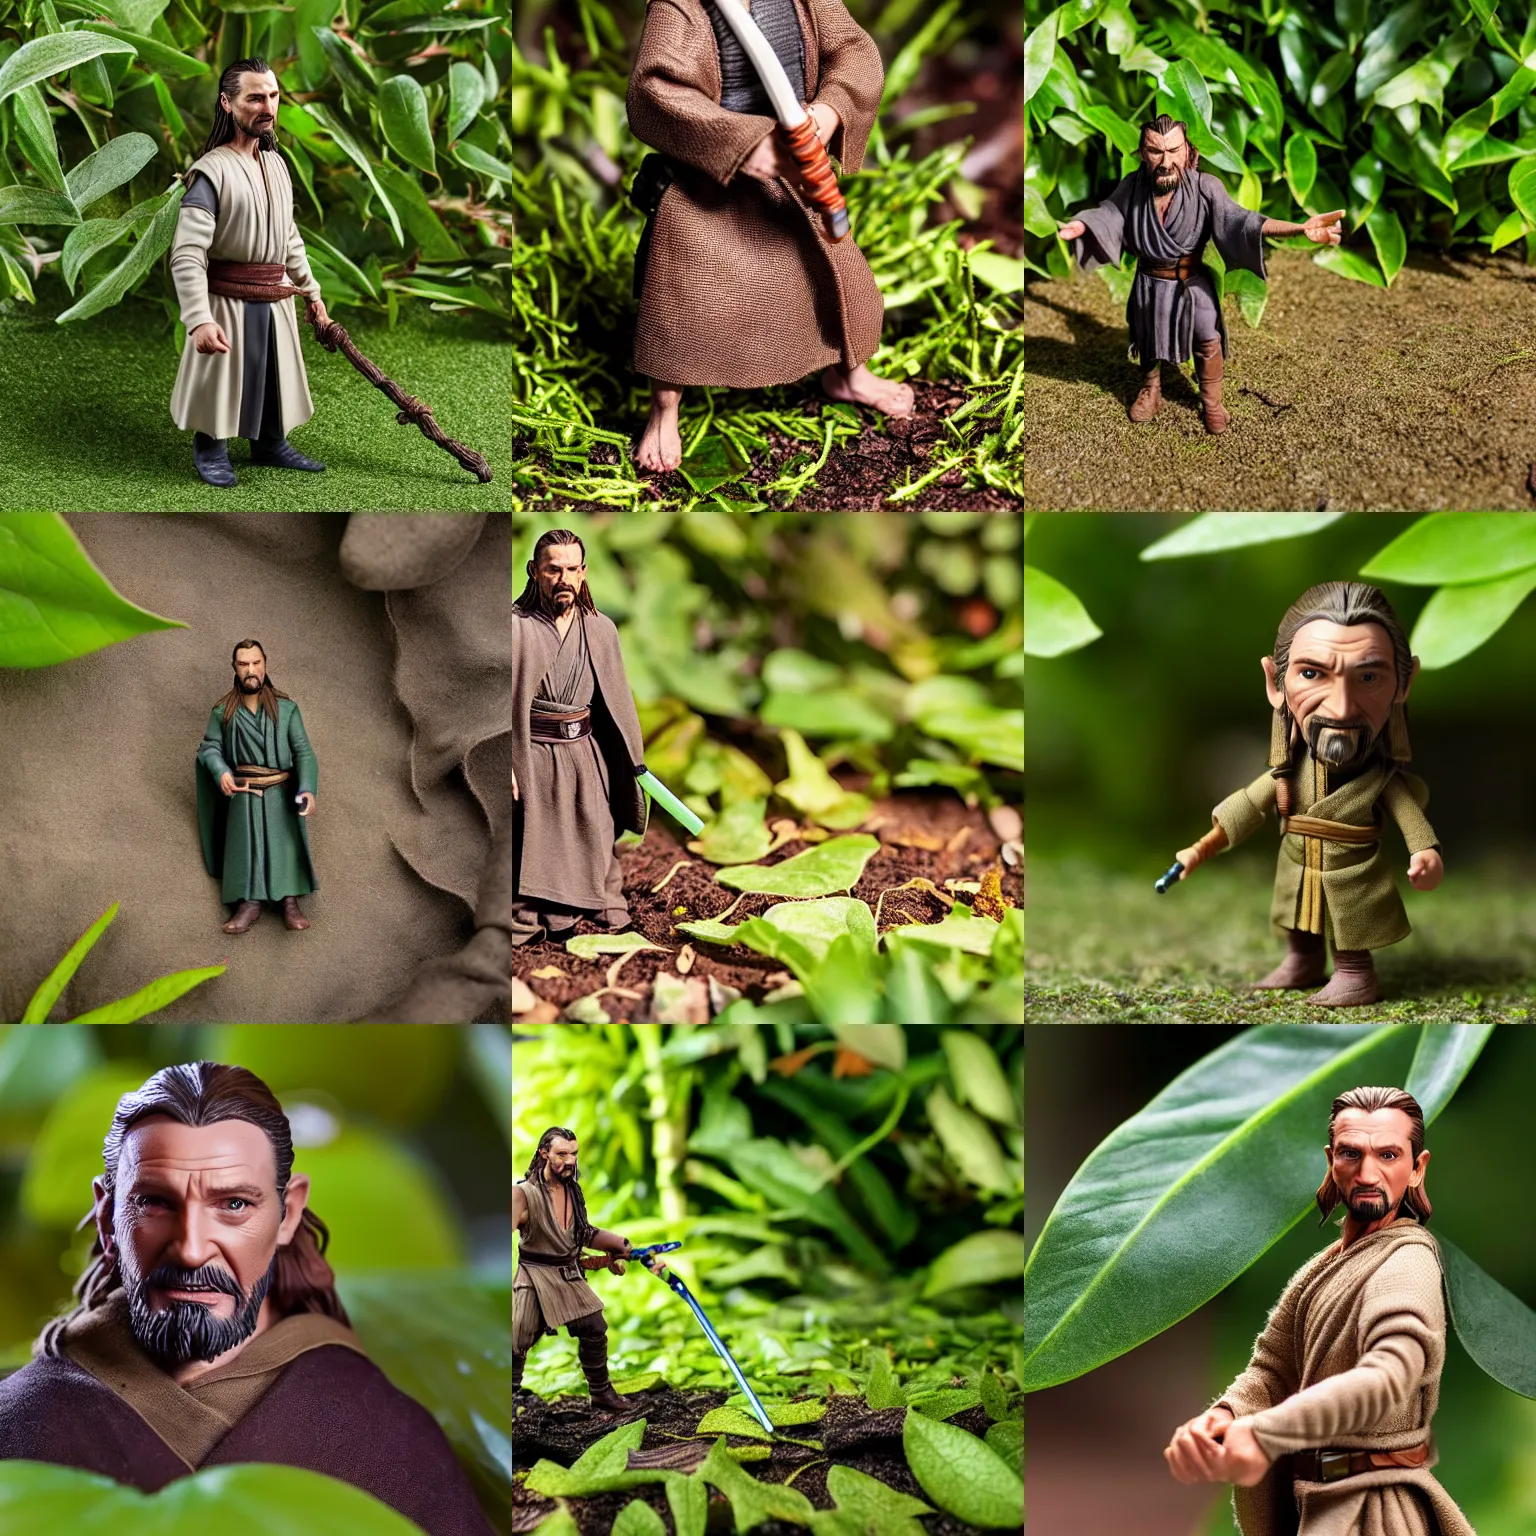 Prompt: Realistic miniature figure of Jedi Qui-Gon Jinn, accurate proportions, standing under a leaf in the garden, macro photography